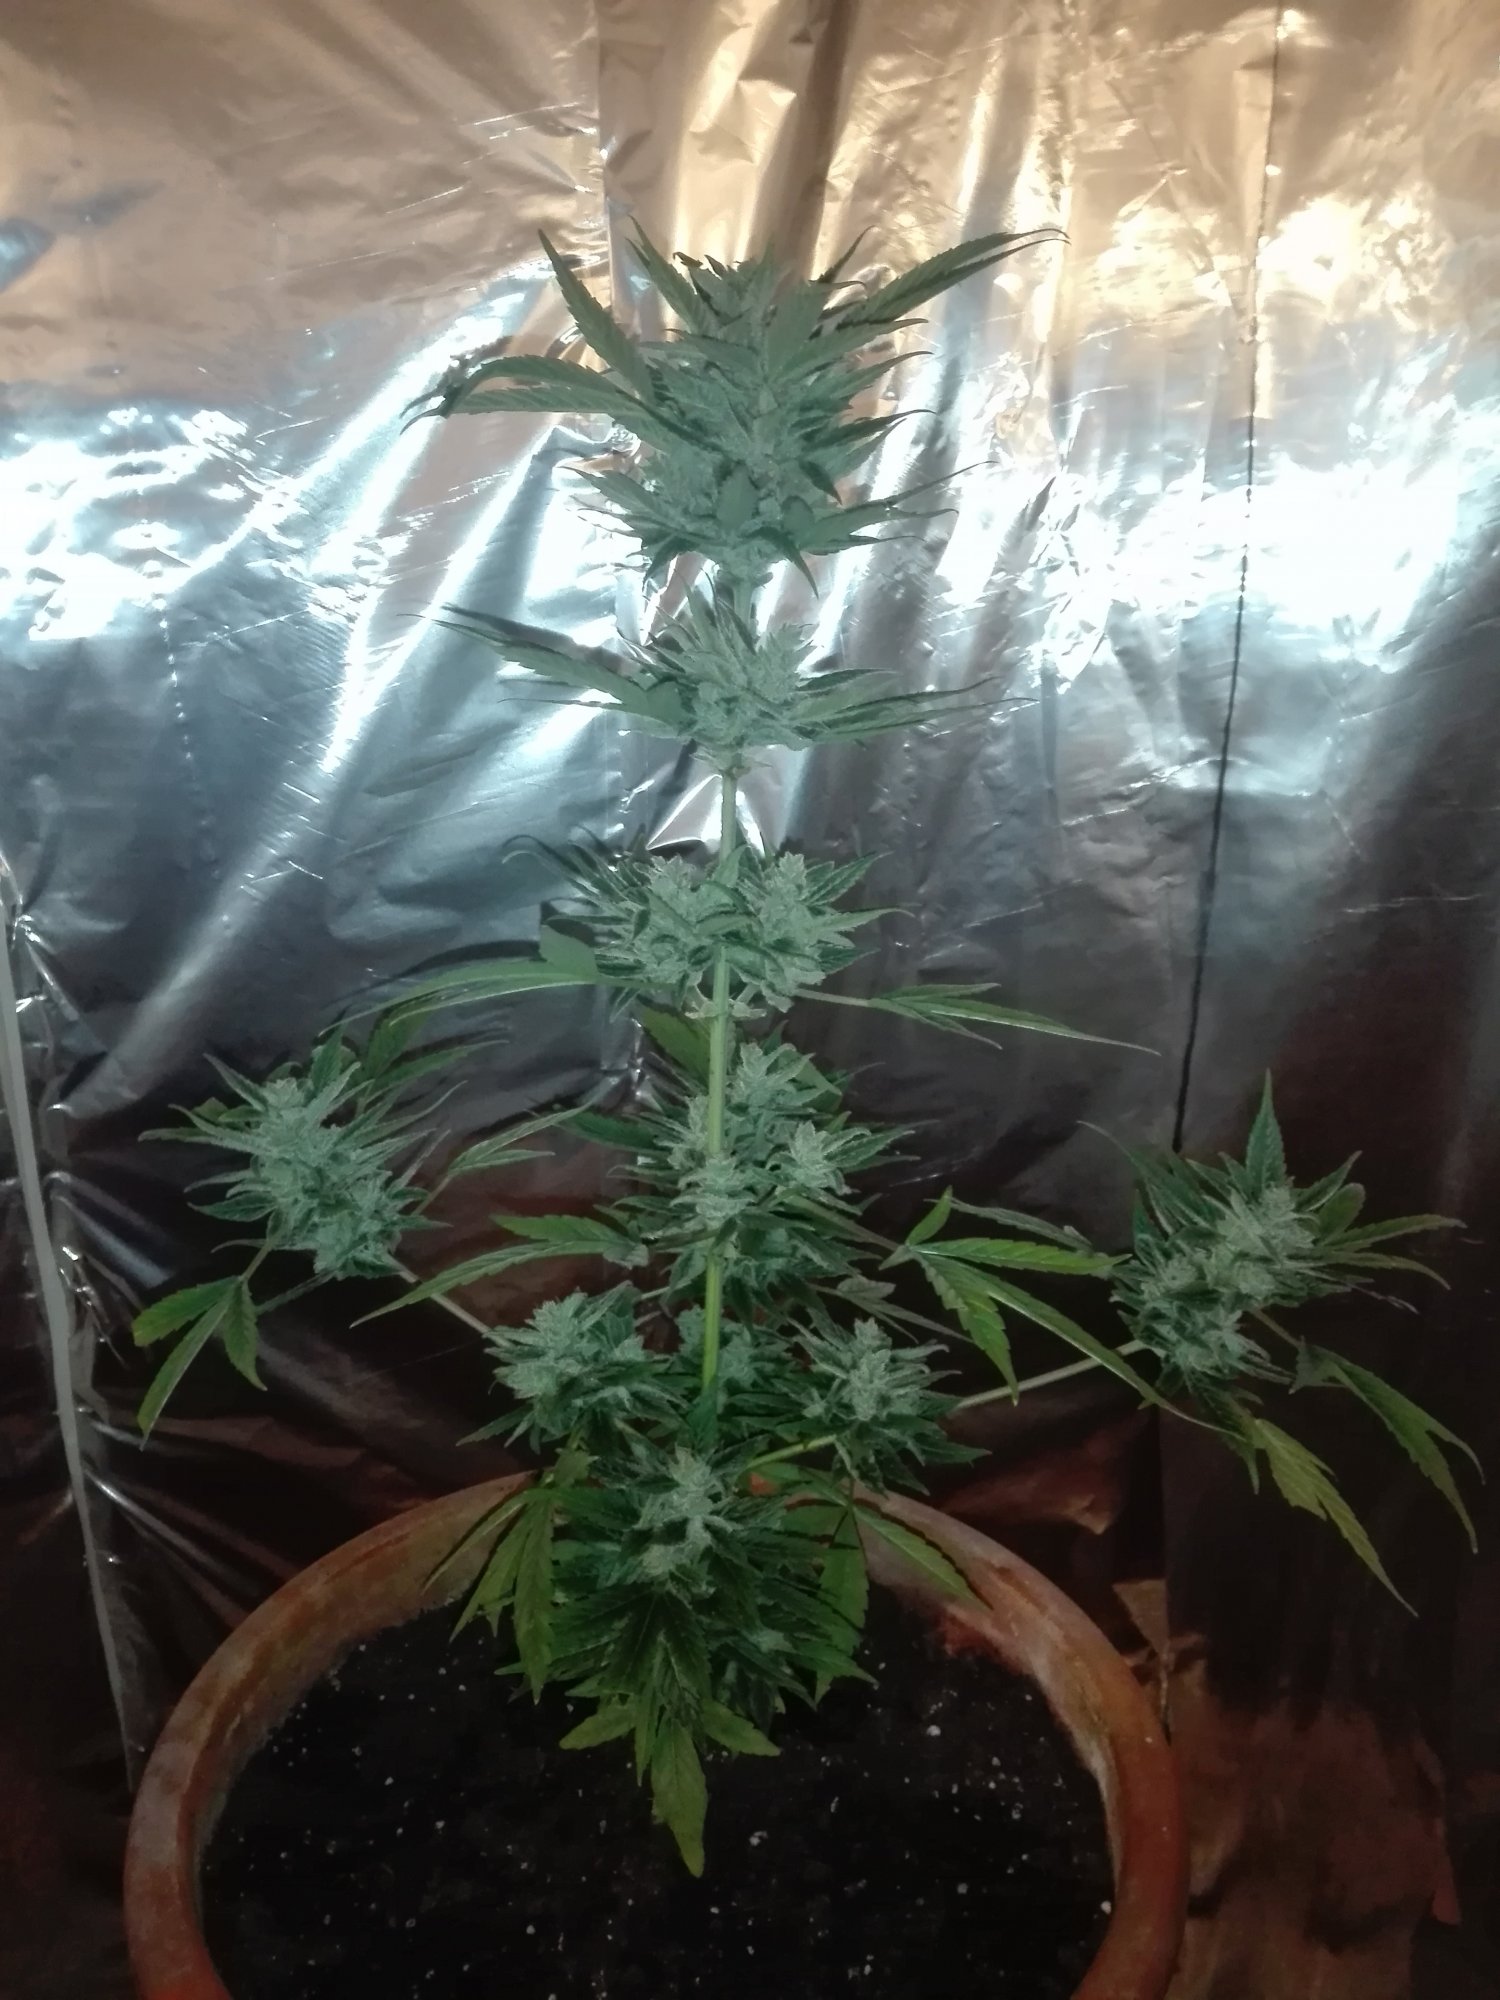 First time grower wondering about my plant